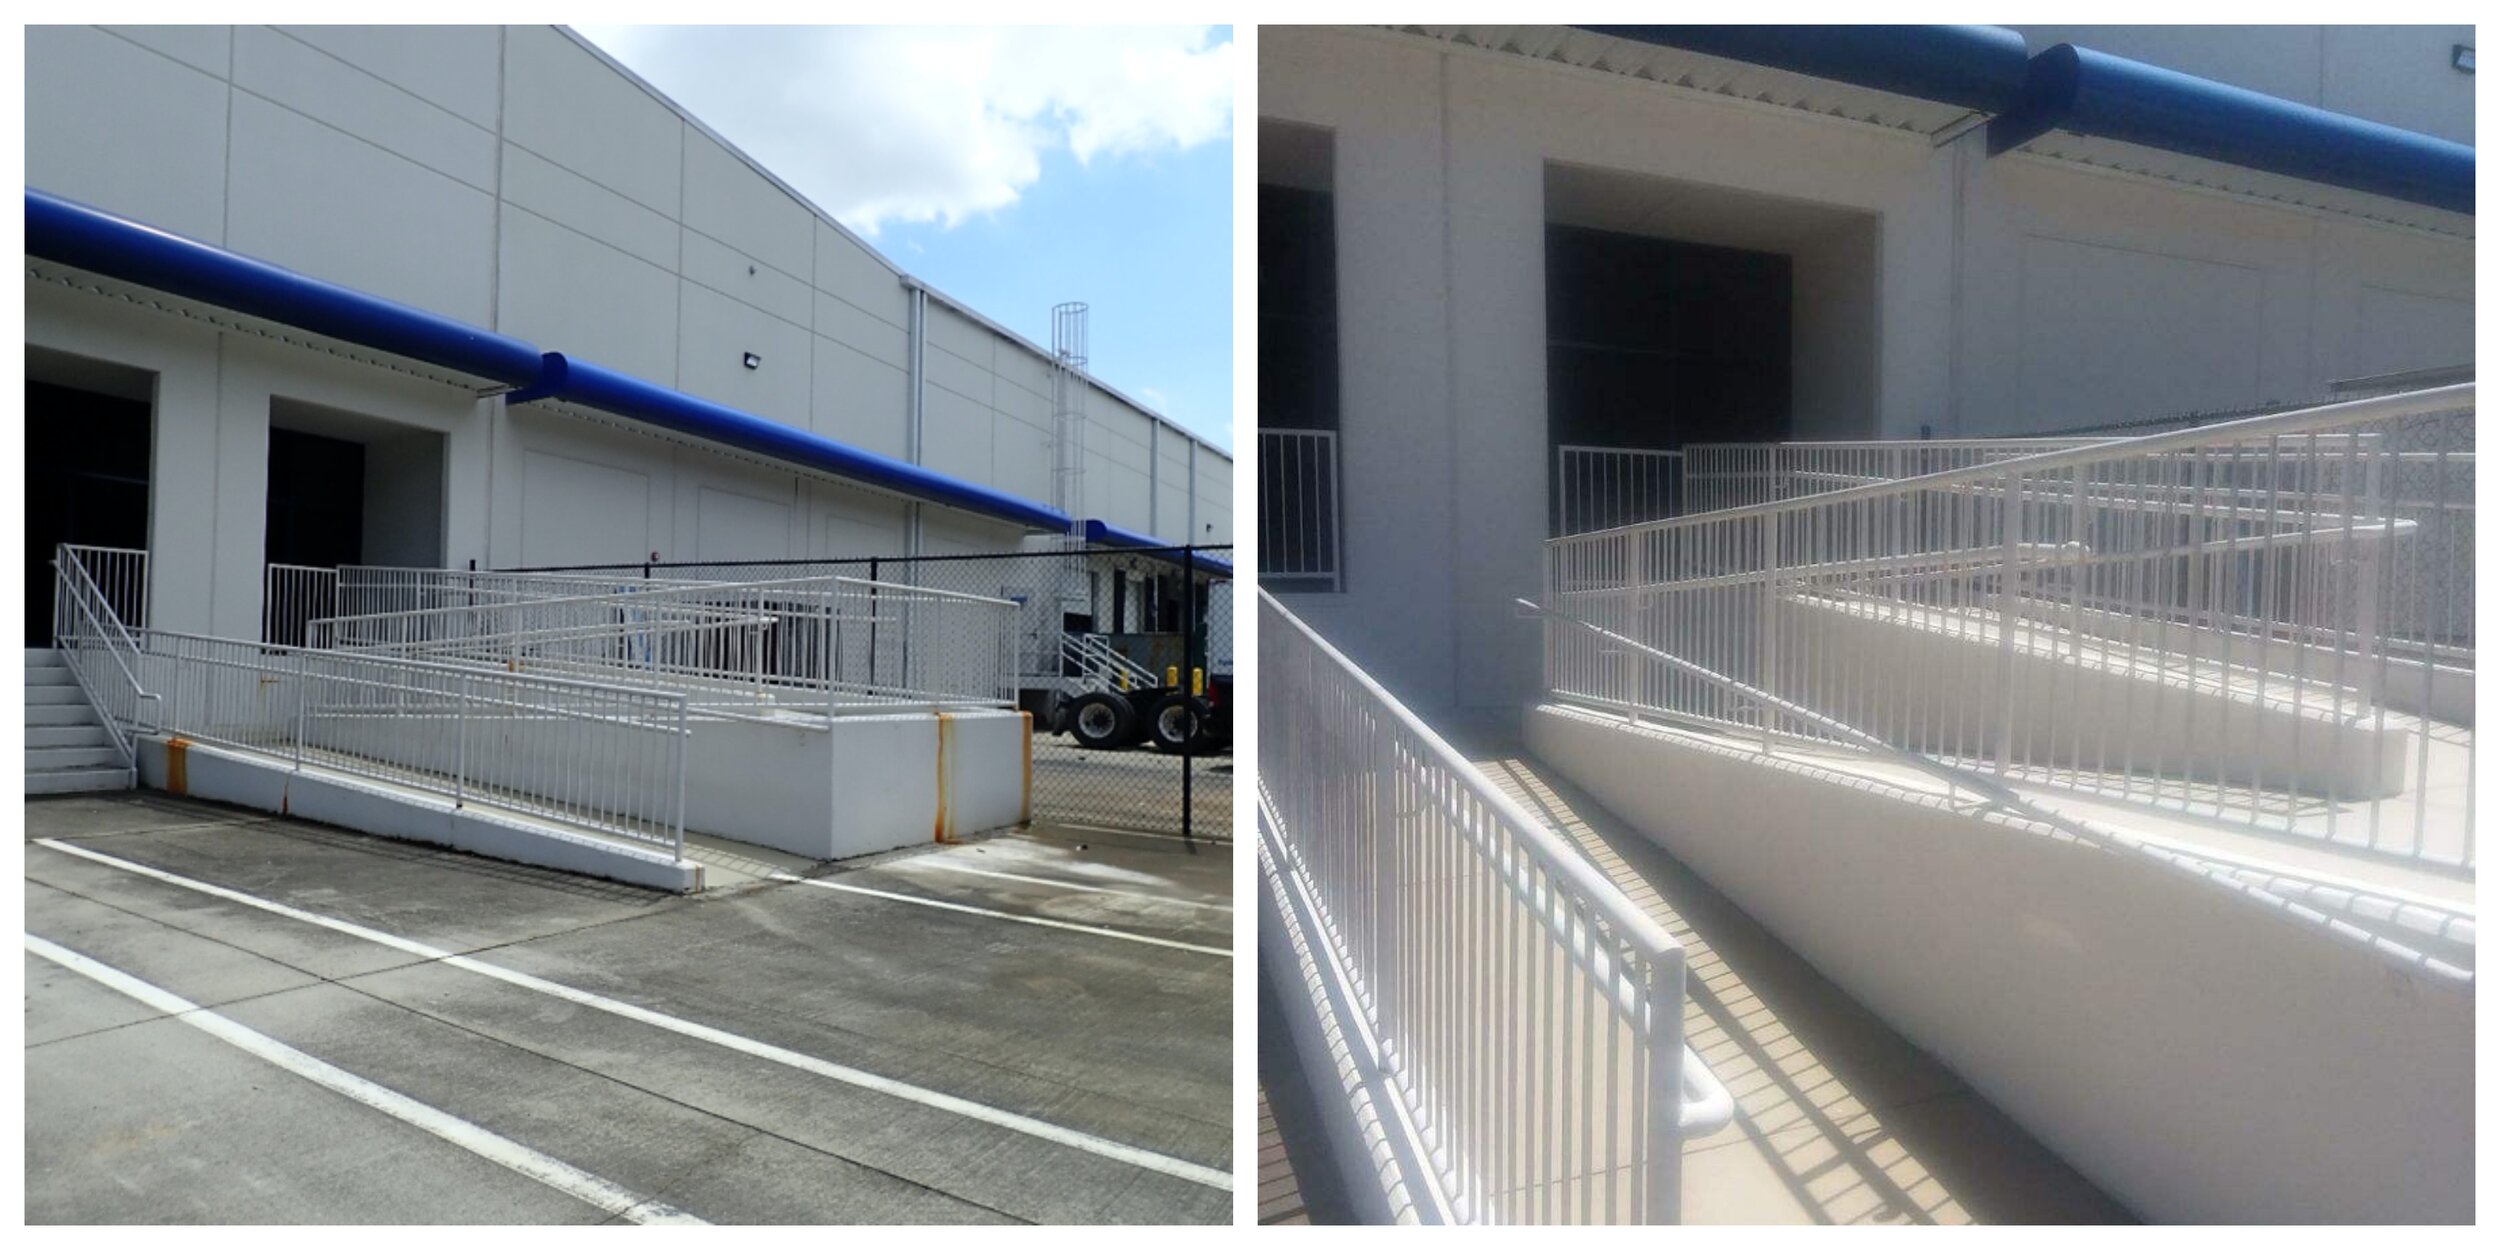 West Lake Loading Dock, before and after